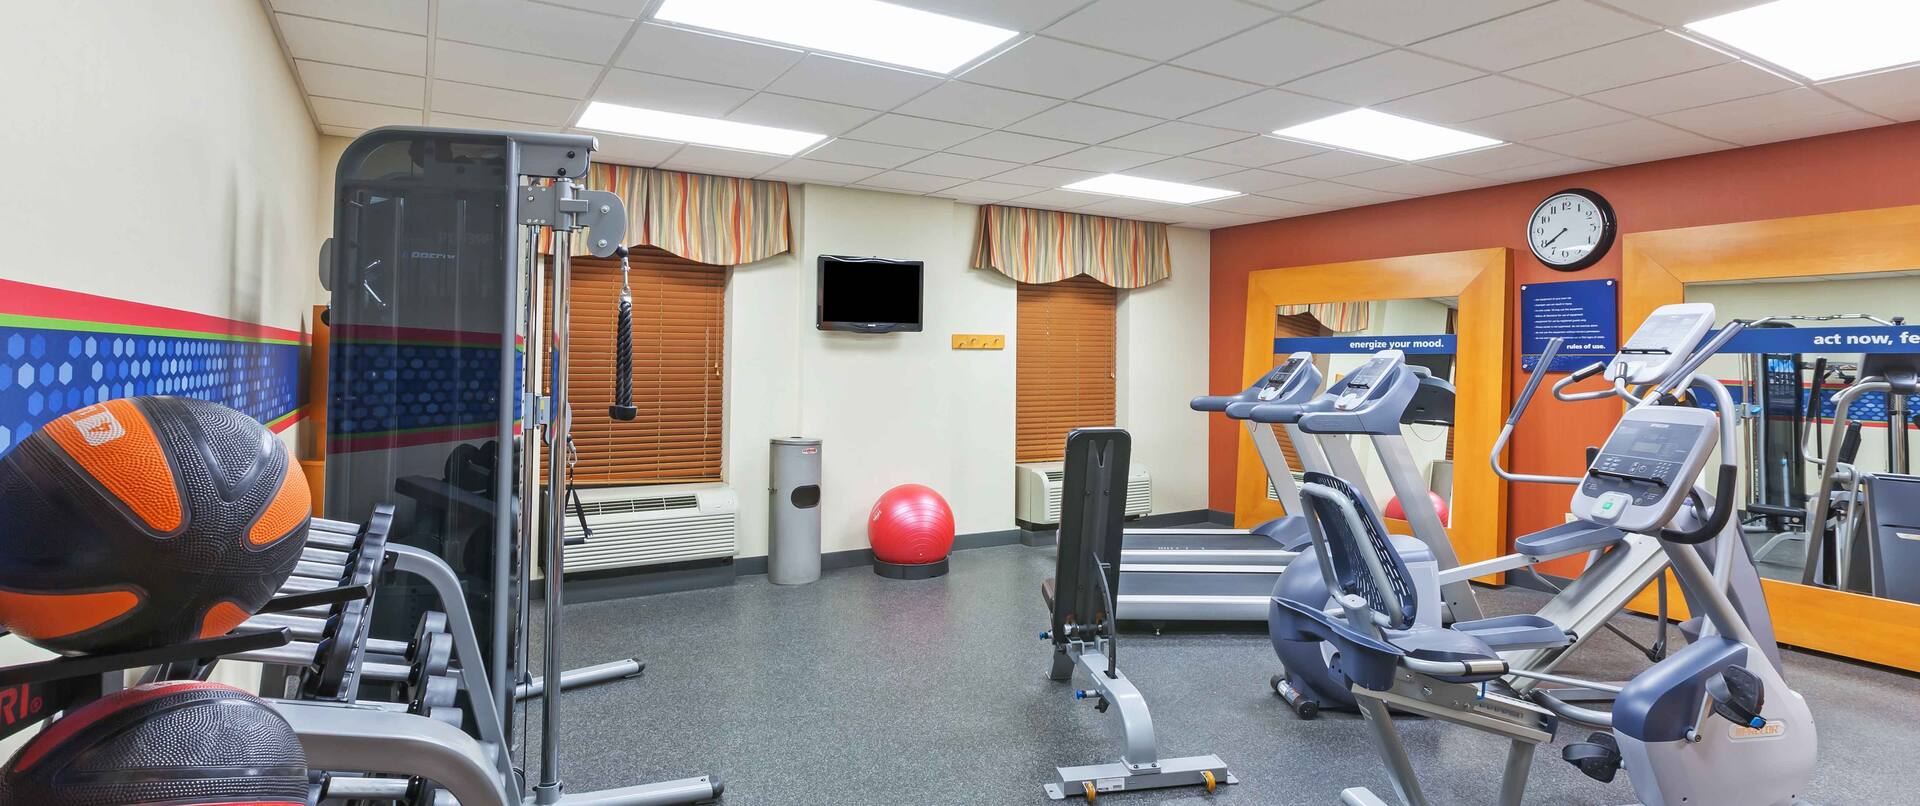 Fitness Center with Cardio and Weight Equipment